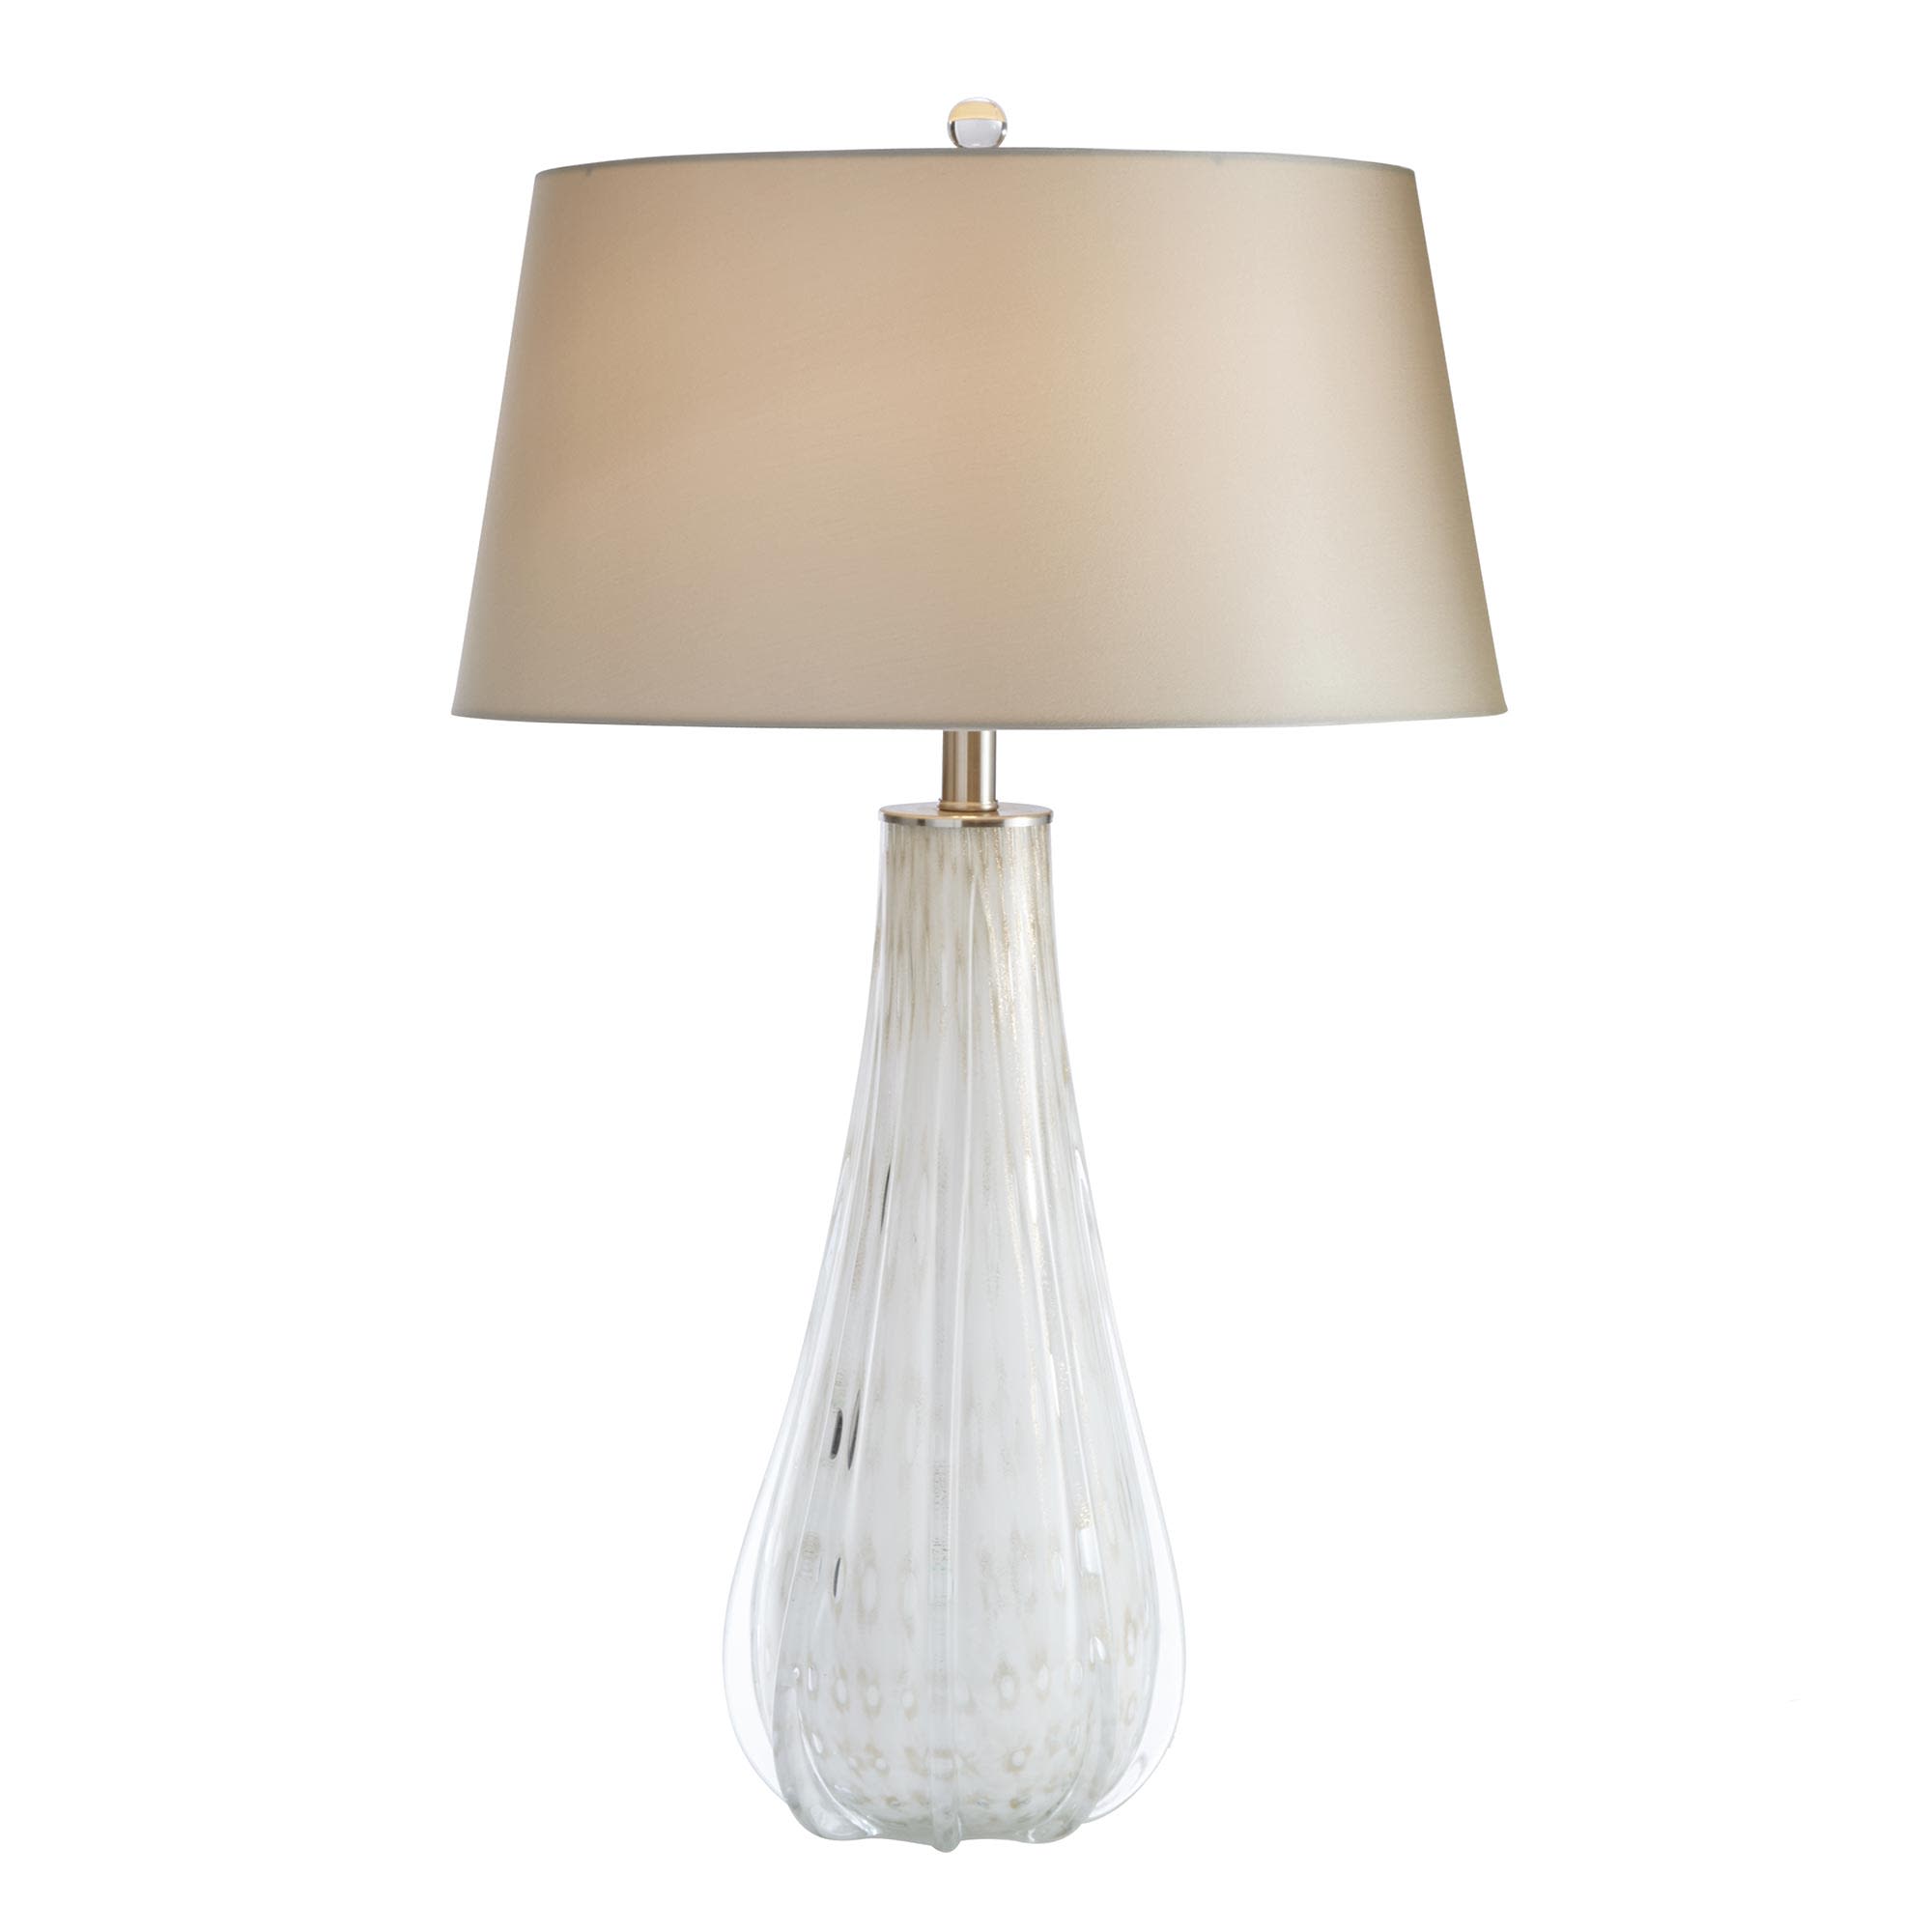 Opal With Metallic Highlights Ludwig, Arteriors Glass Table Lamp